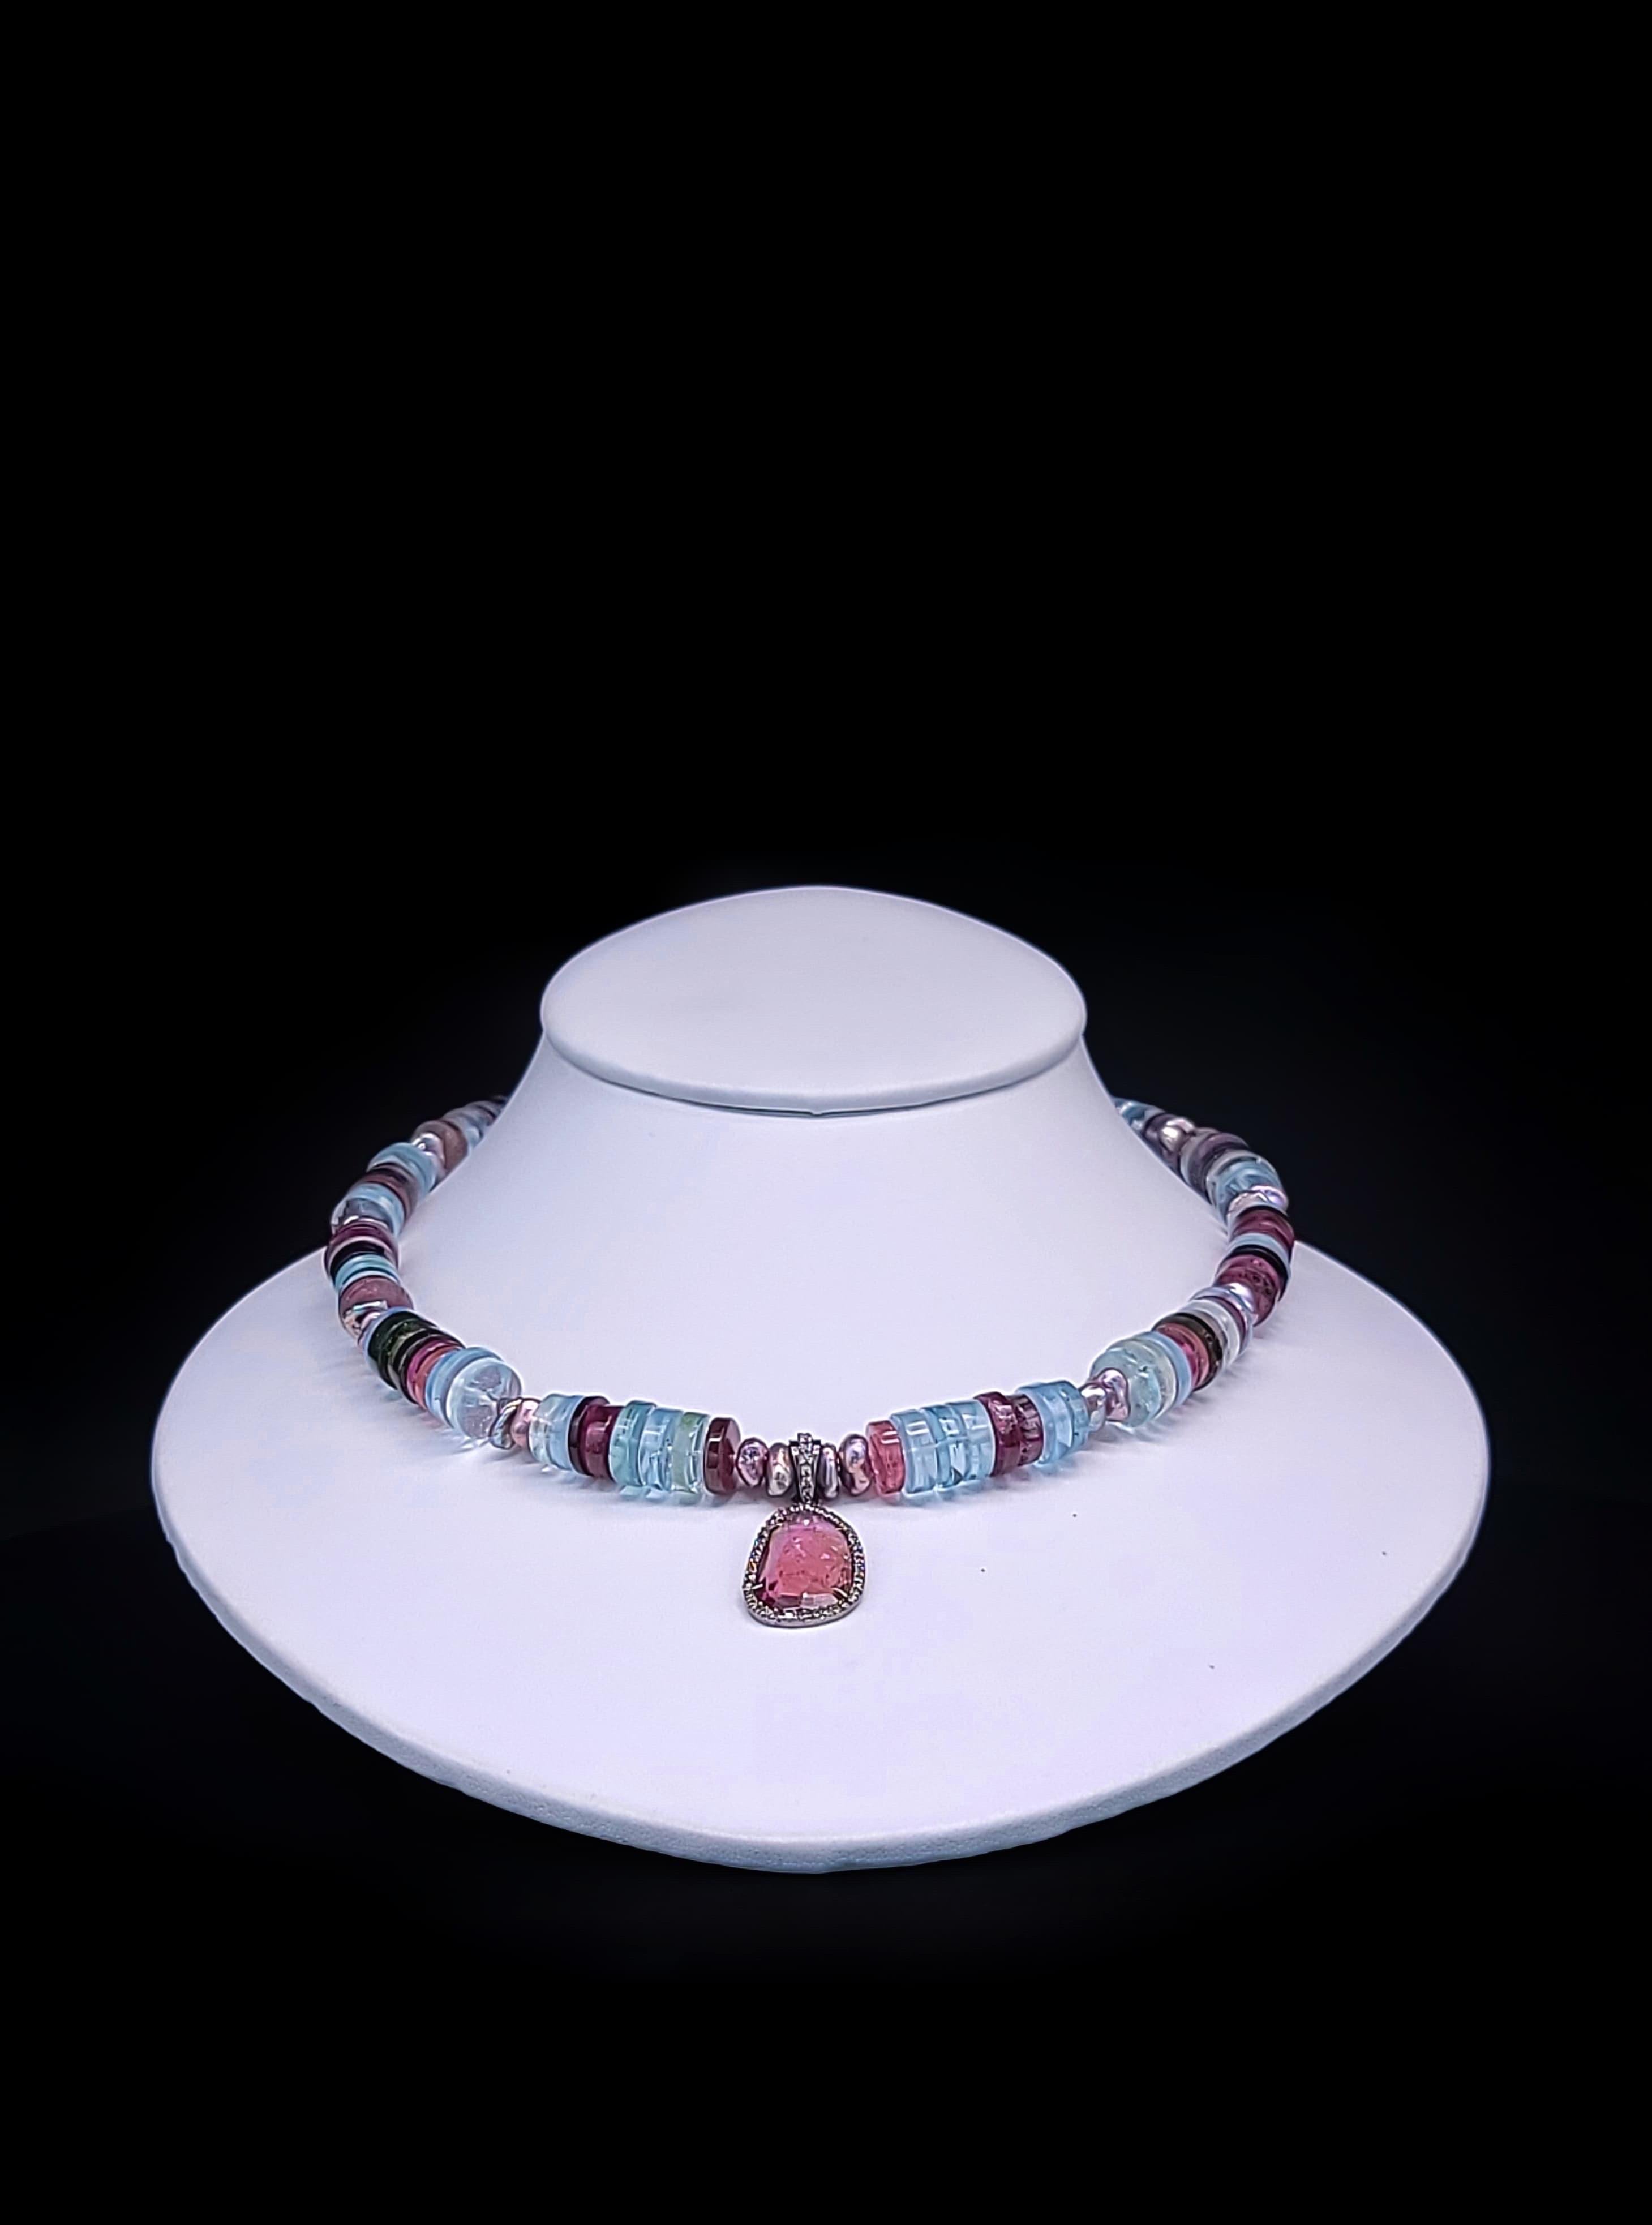 A.Jeschel Tourmaline and Aquamarine cleverly merge in a gentle ladylike necklace 7